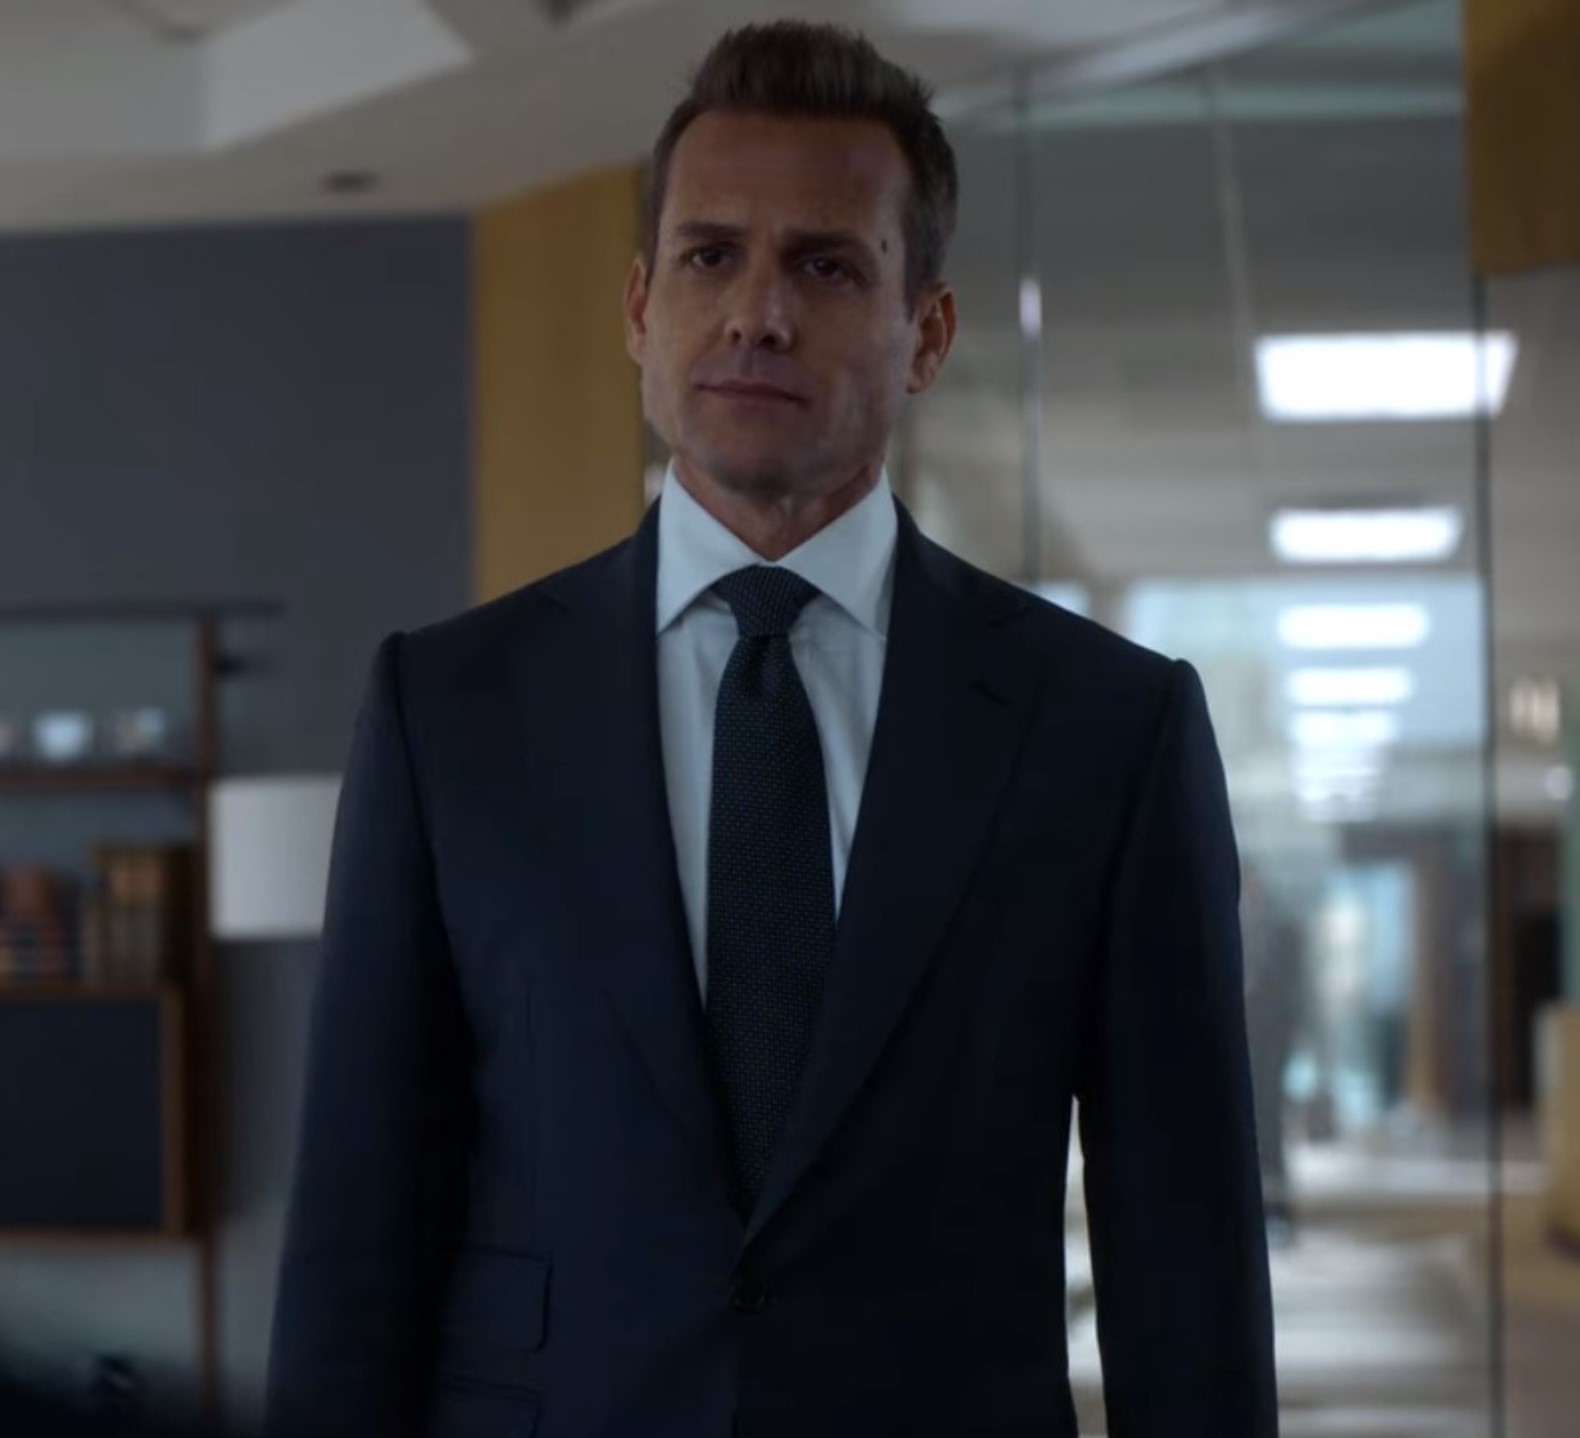 The suits of Harvey from Season 9 – Suits of Harvey Specter